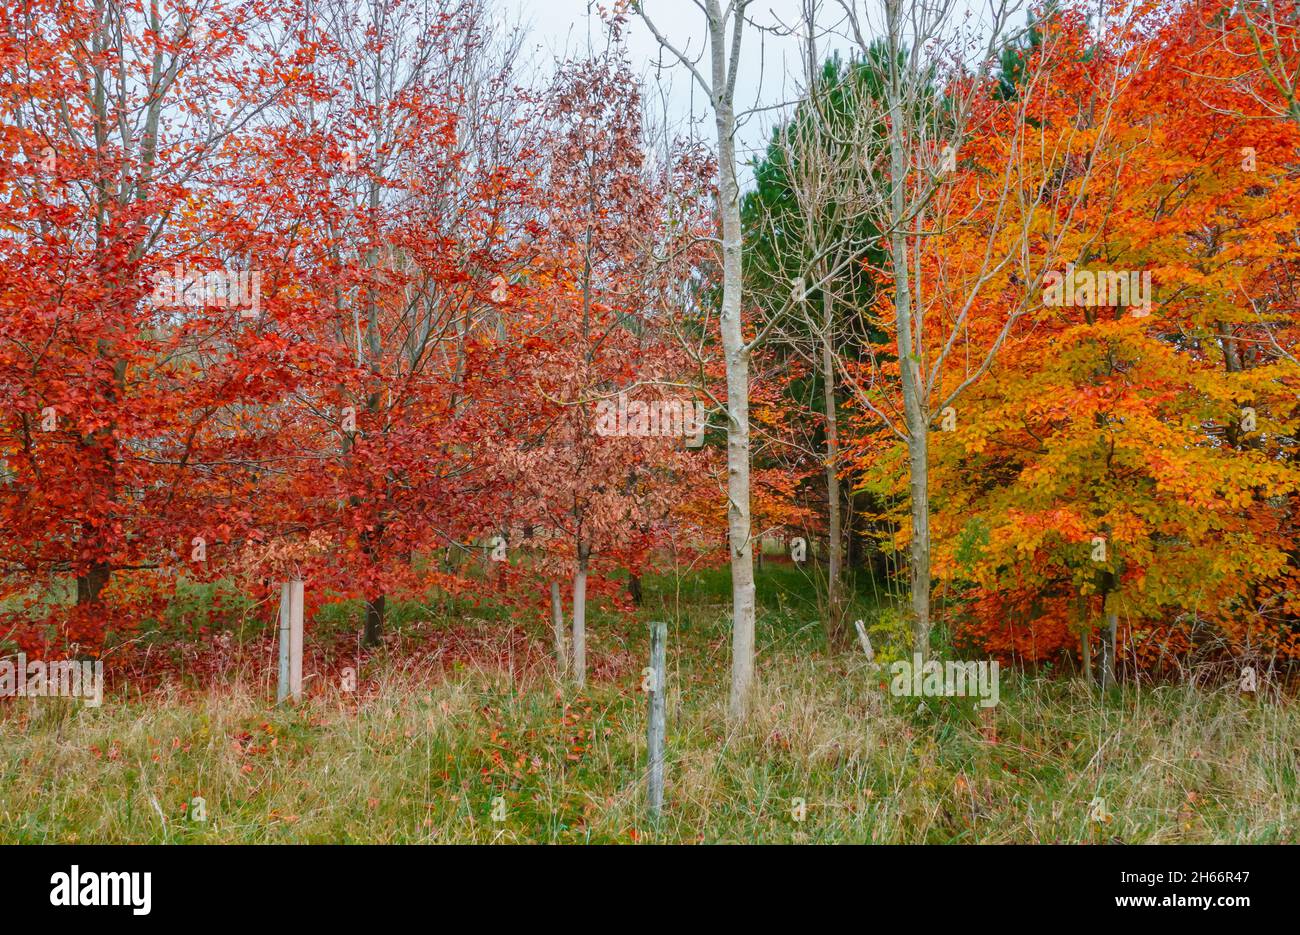 autumnal leaves with red, copper, orange and yellow leaves on small tree branches Stock Photo